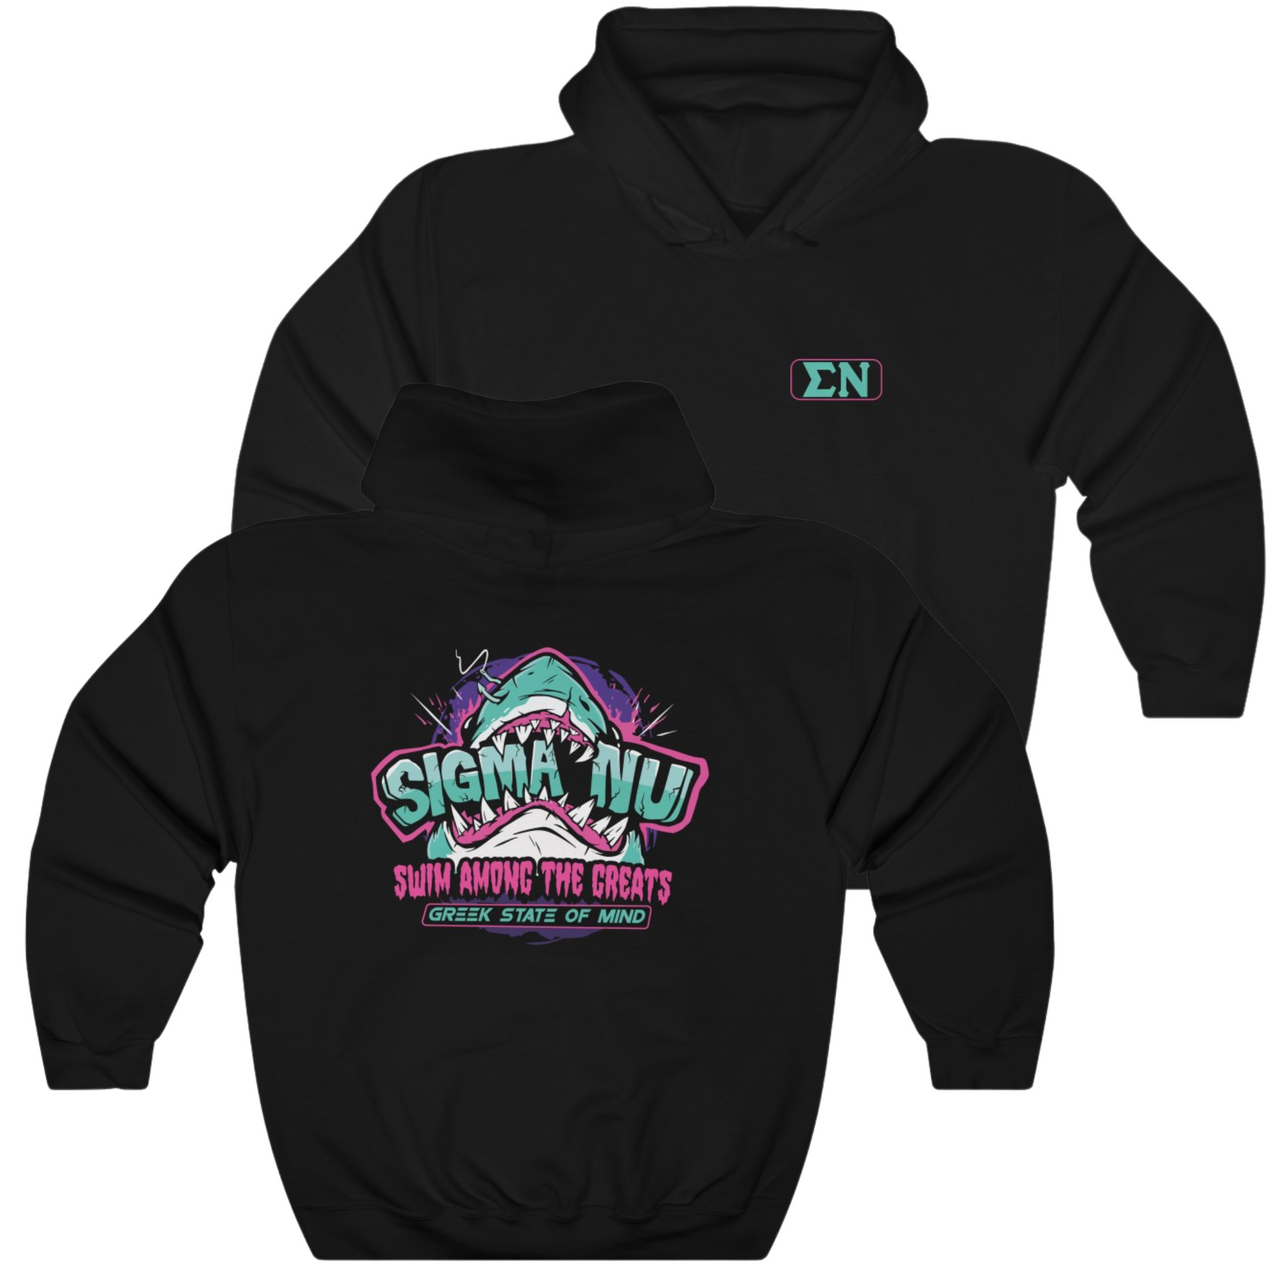 Black Sigma Nu Graphic Hoodie | The Deep End | Sigma Nu Clothing, Apparel and Merchandise